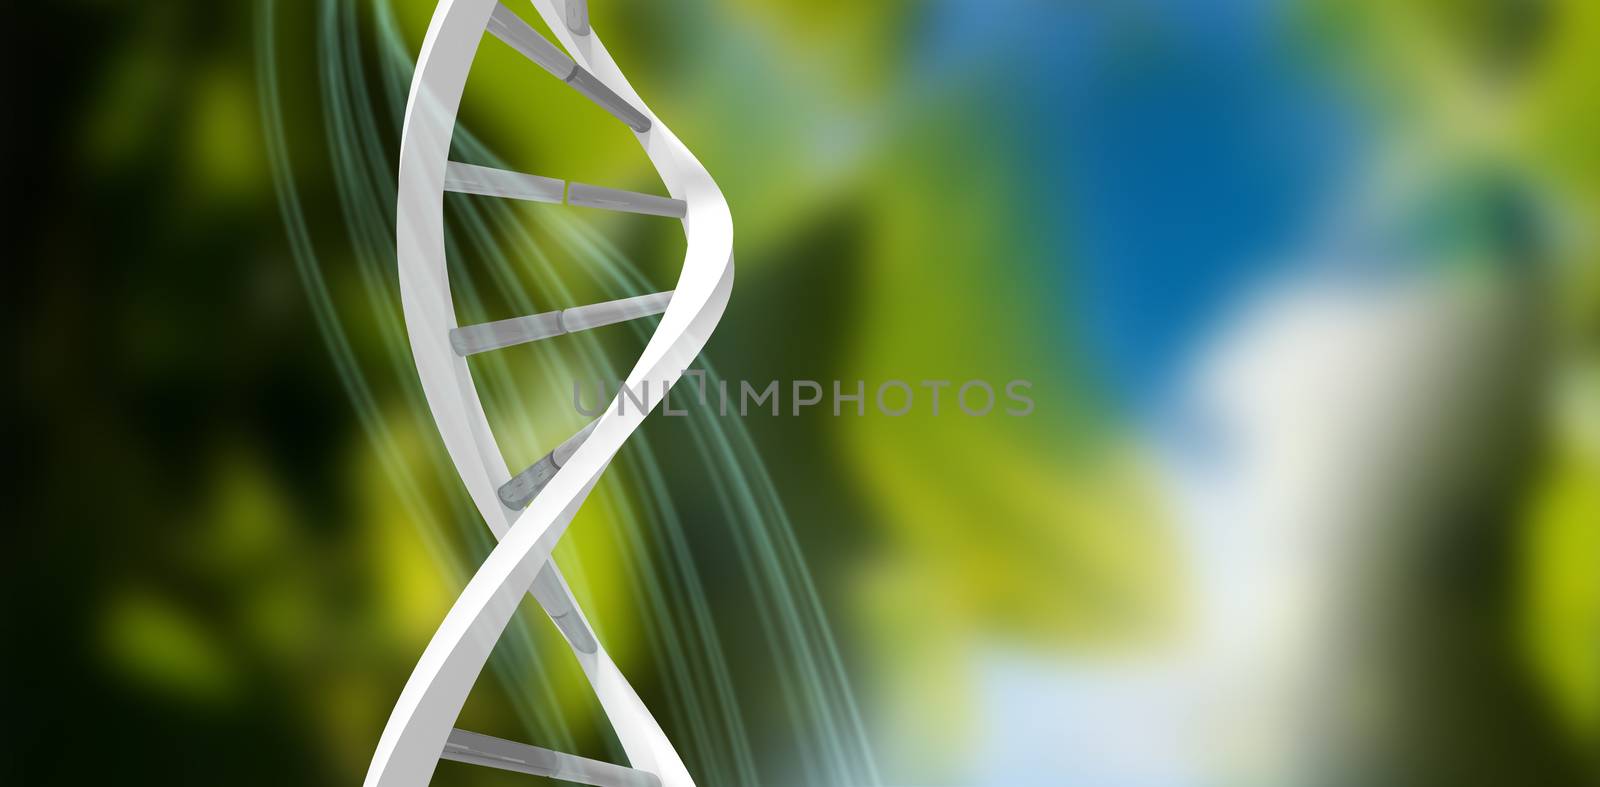 Composite image of image of dna helix by Wavebreakmedia